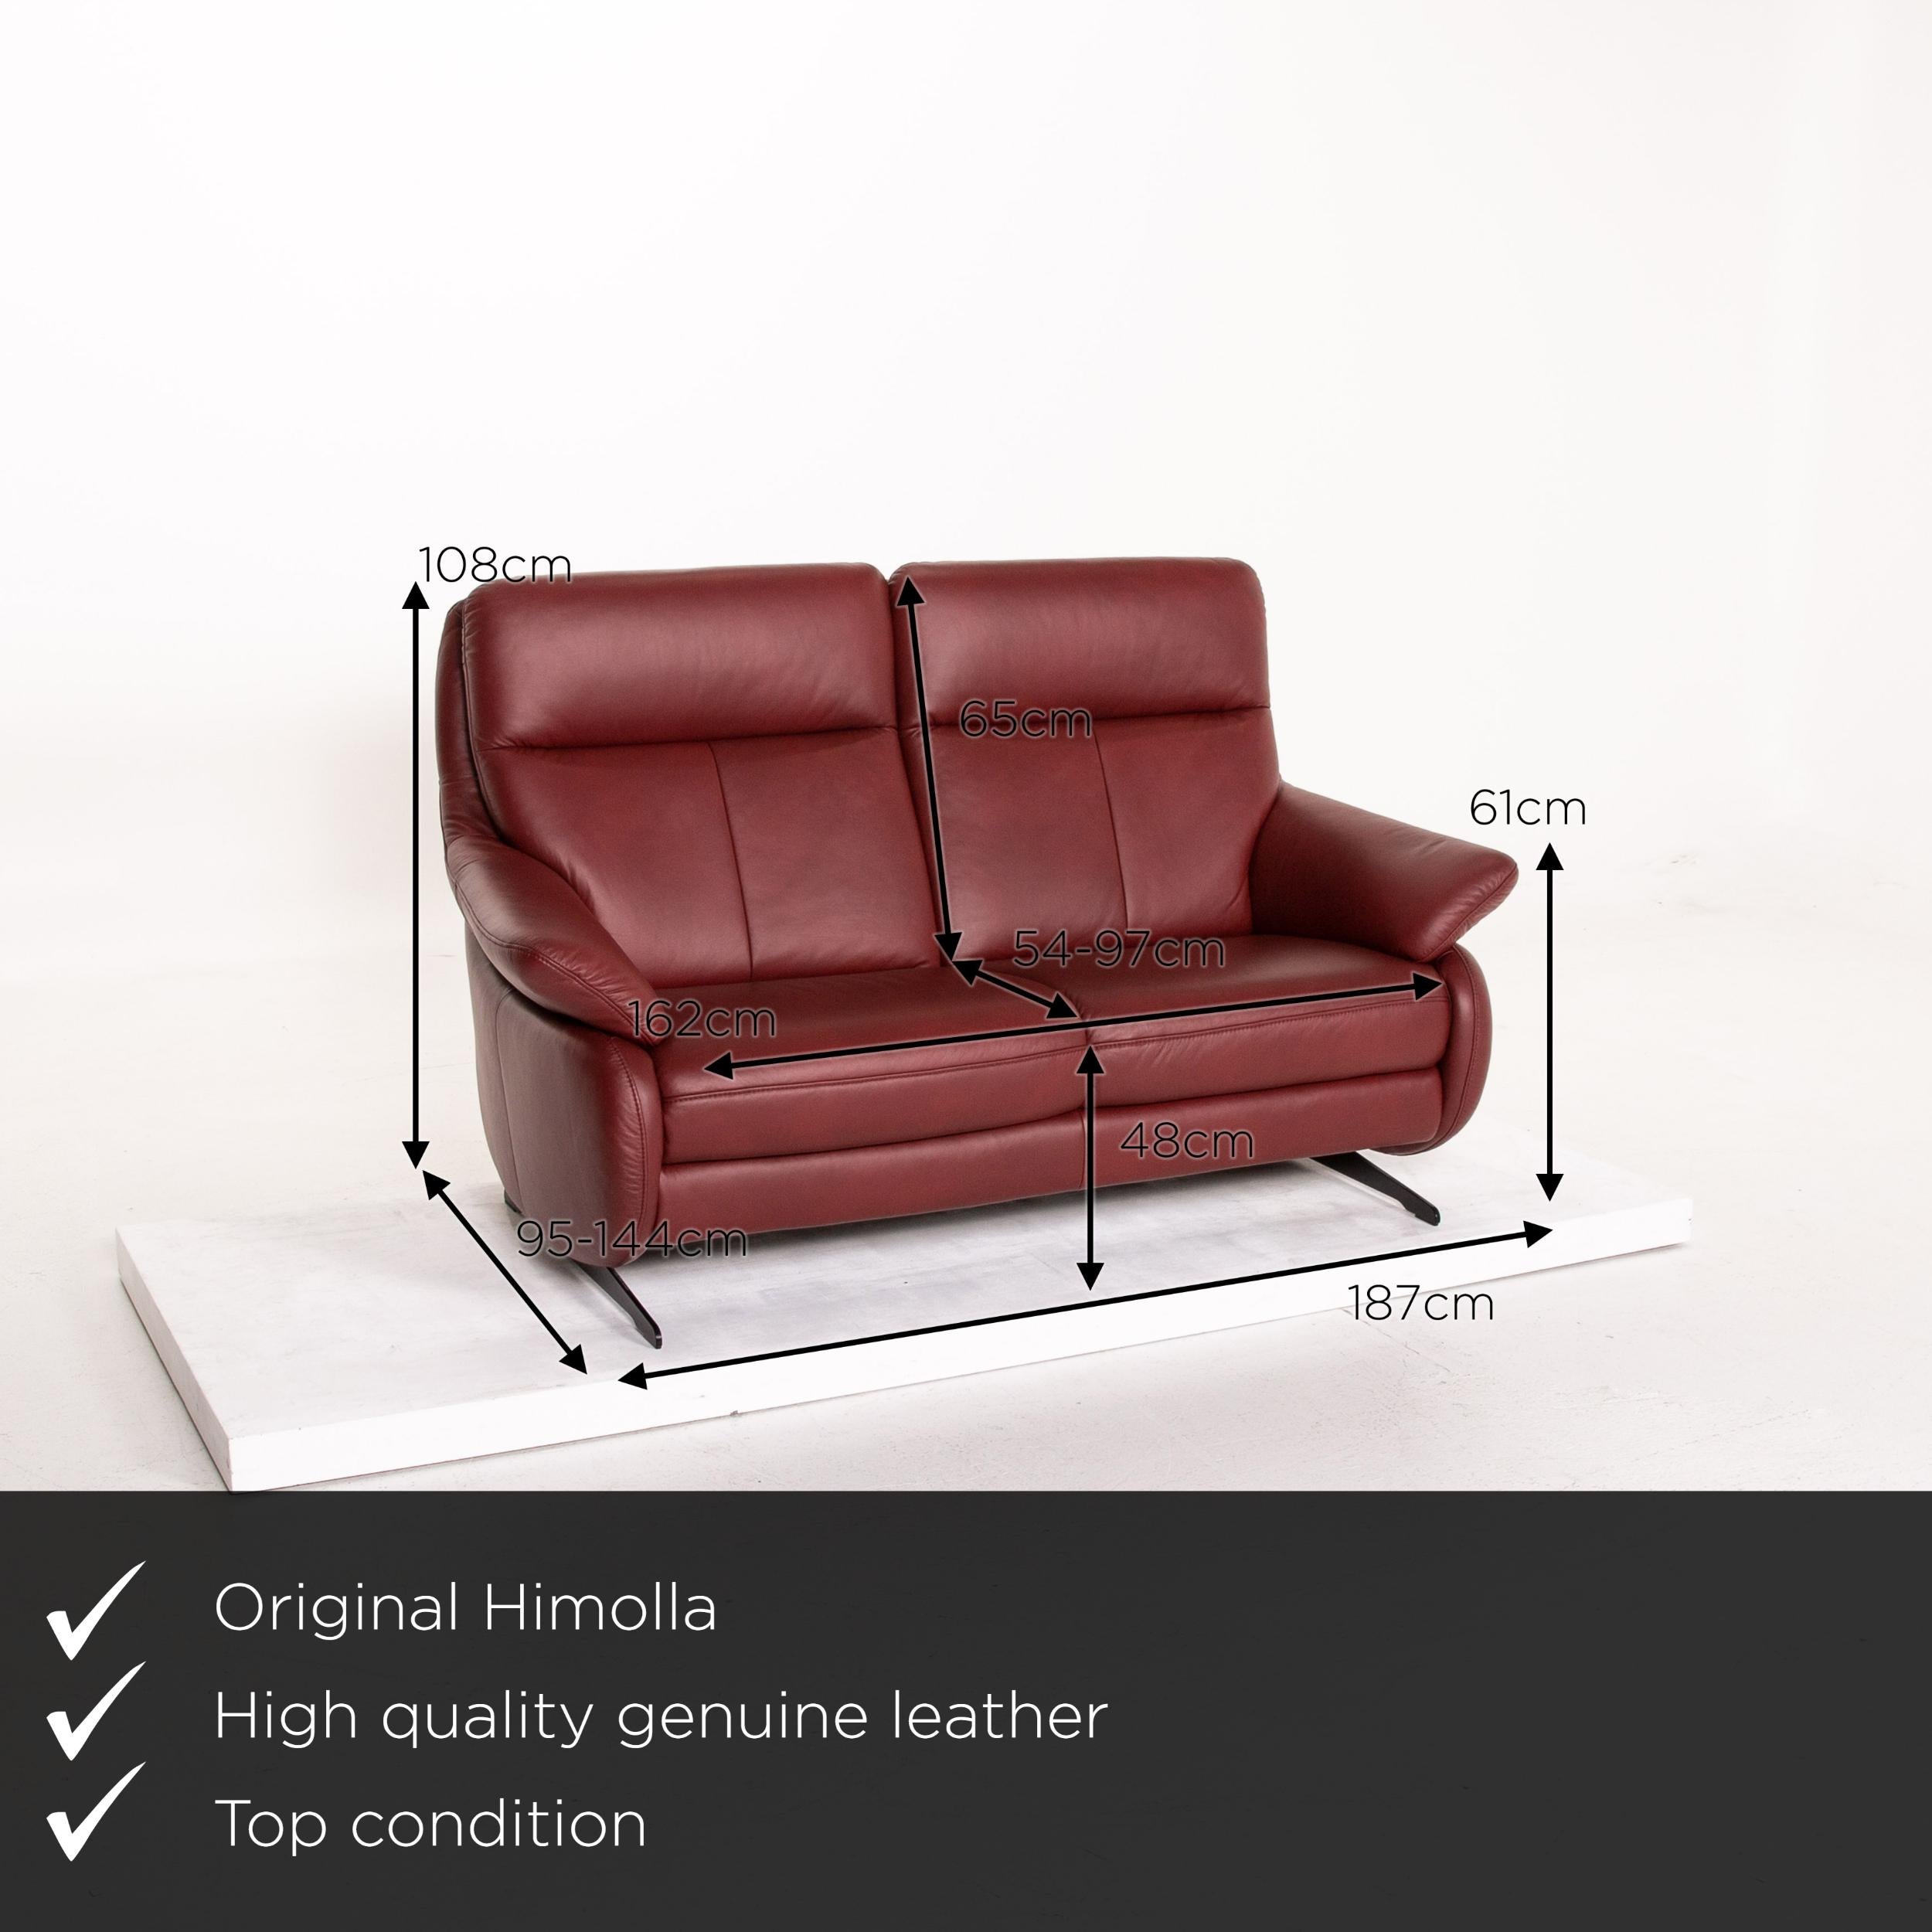 We present to you a Himolla leather sofa electric function red dark red relax function couch.
    
 

 Product measurements in centimeters:
 

Depth 95
Width 187
Height 108
Seat height 48
Rest height 61
Seat depth 54
Seat width